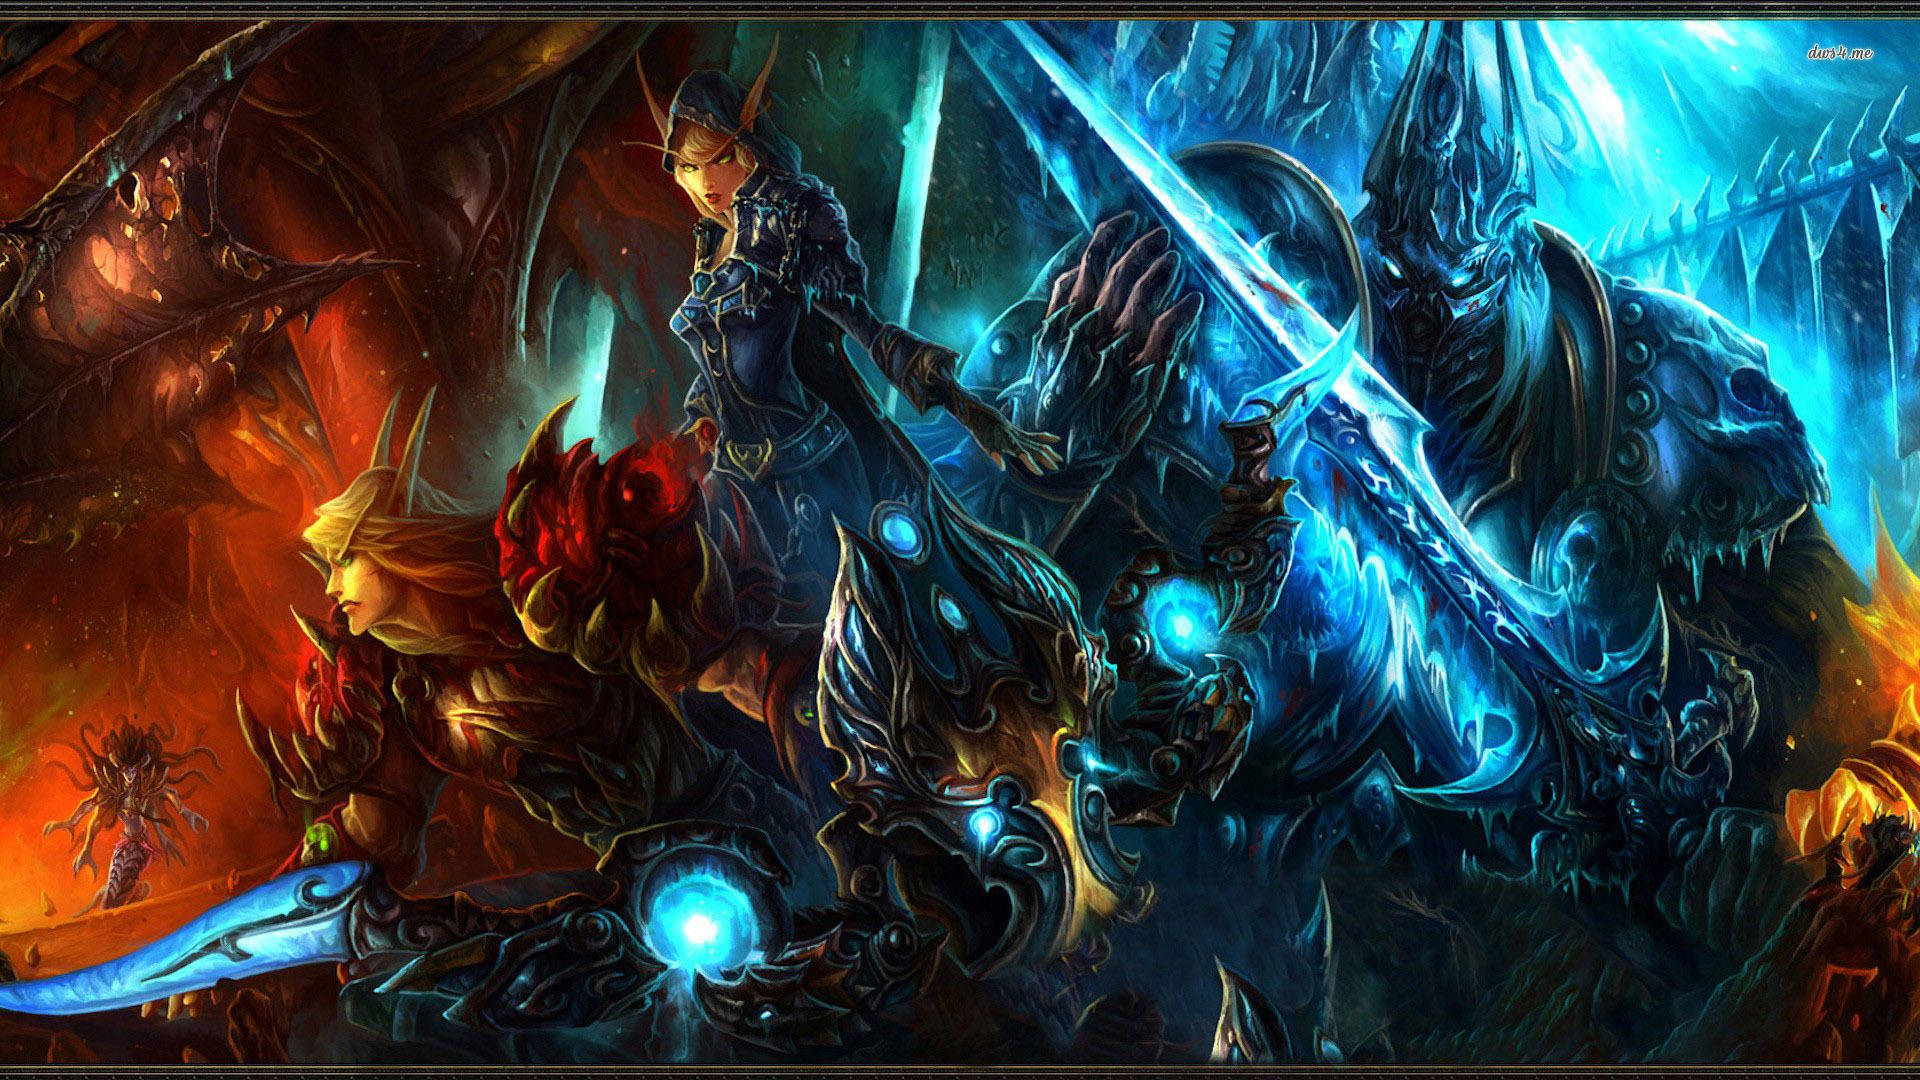 Adventurers prepare to take on the Lich King in World of Warcraft Wrath of the Lich King Wallpaper